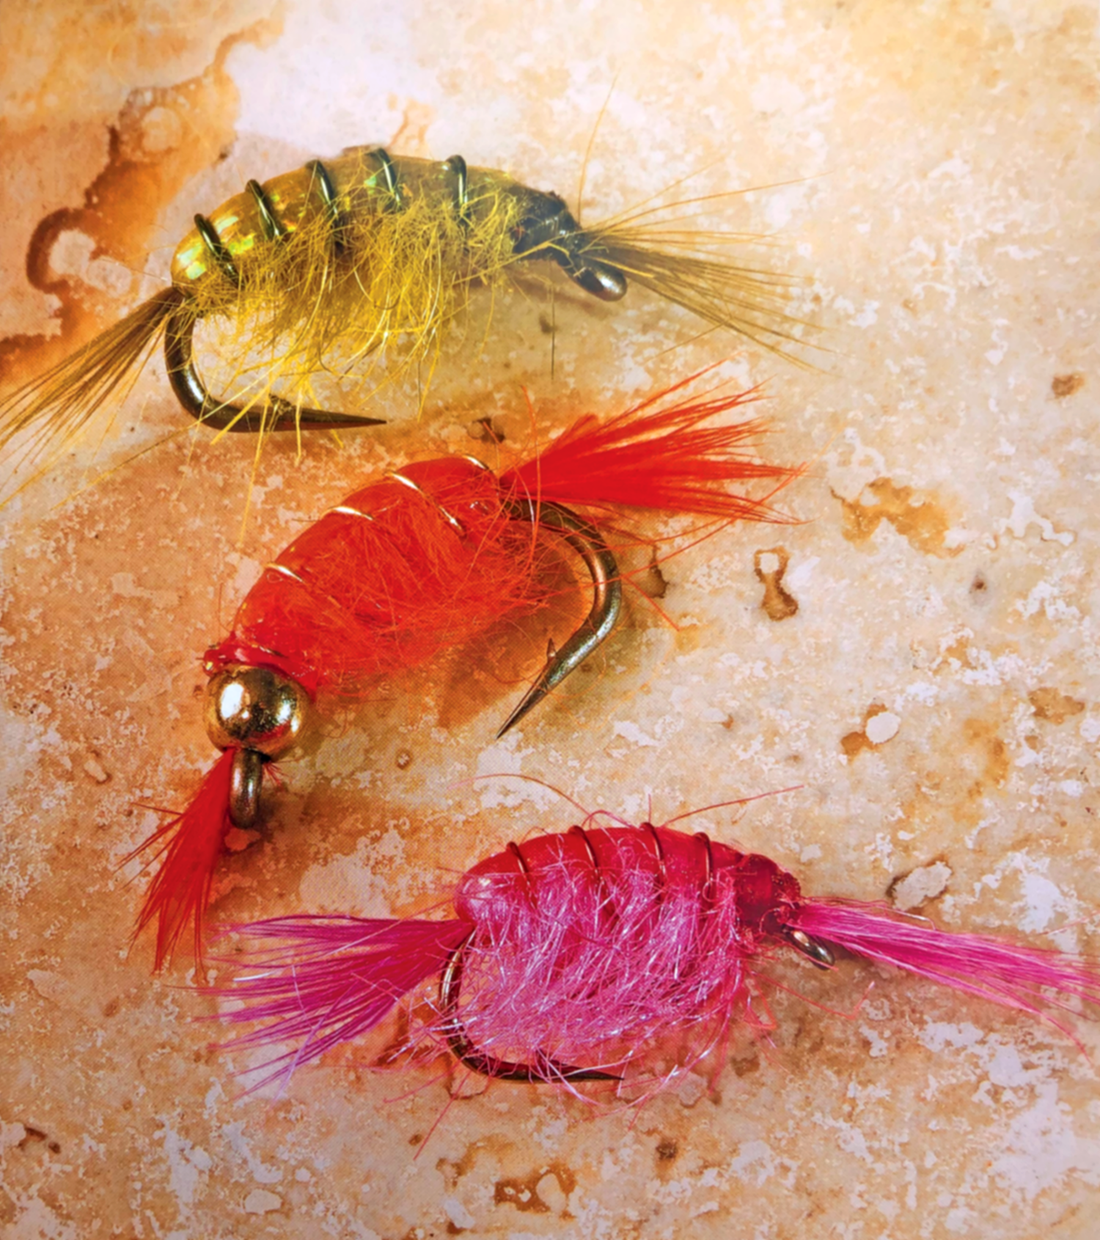 SCUDS - An excerpt from the book 40 Great American Trout Flies by Craig Schuhmann